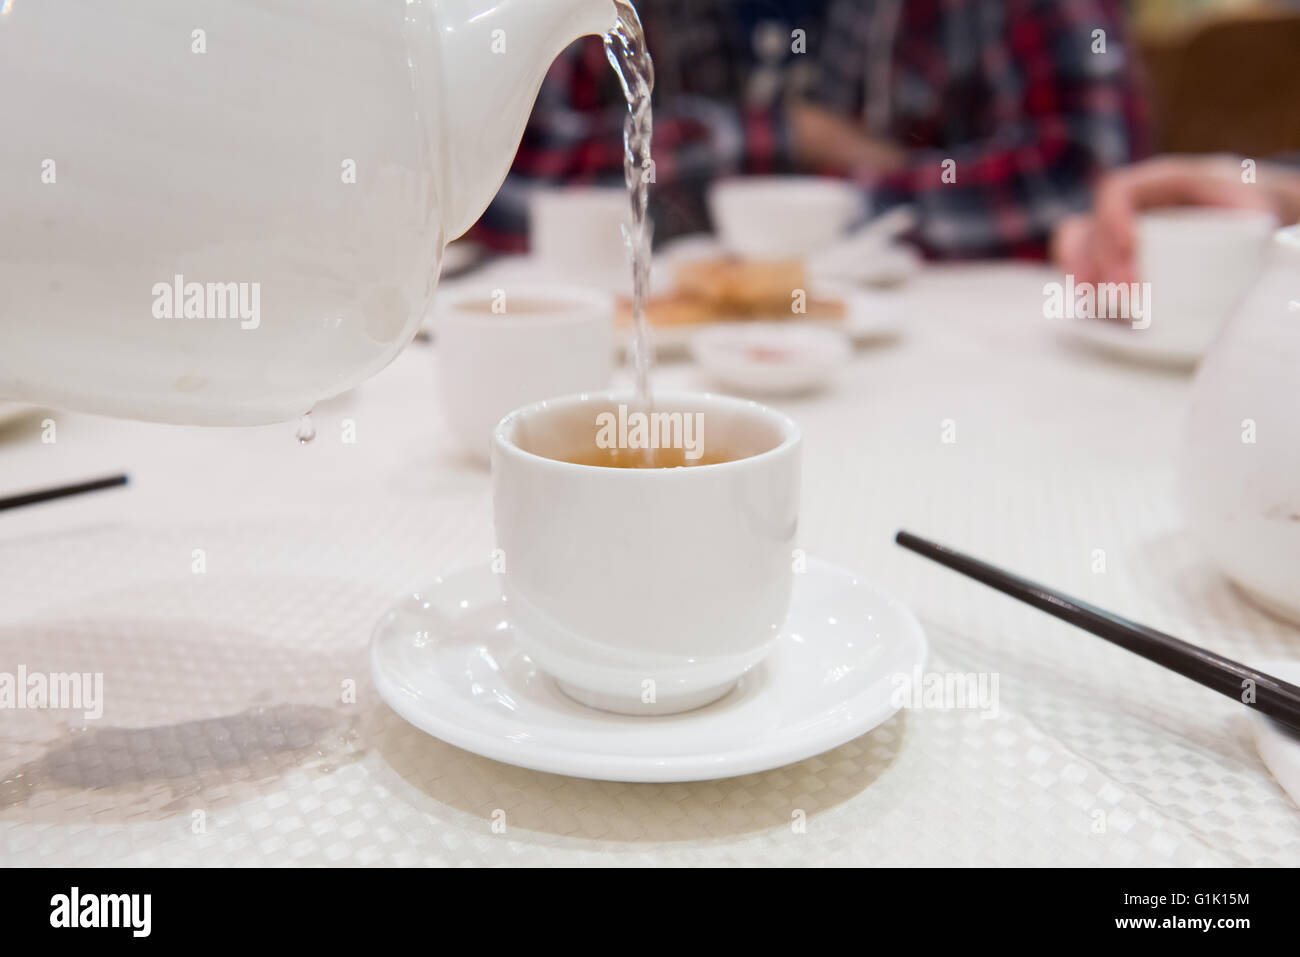 pouring hot water into tea cup at table Stock Photo